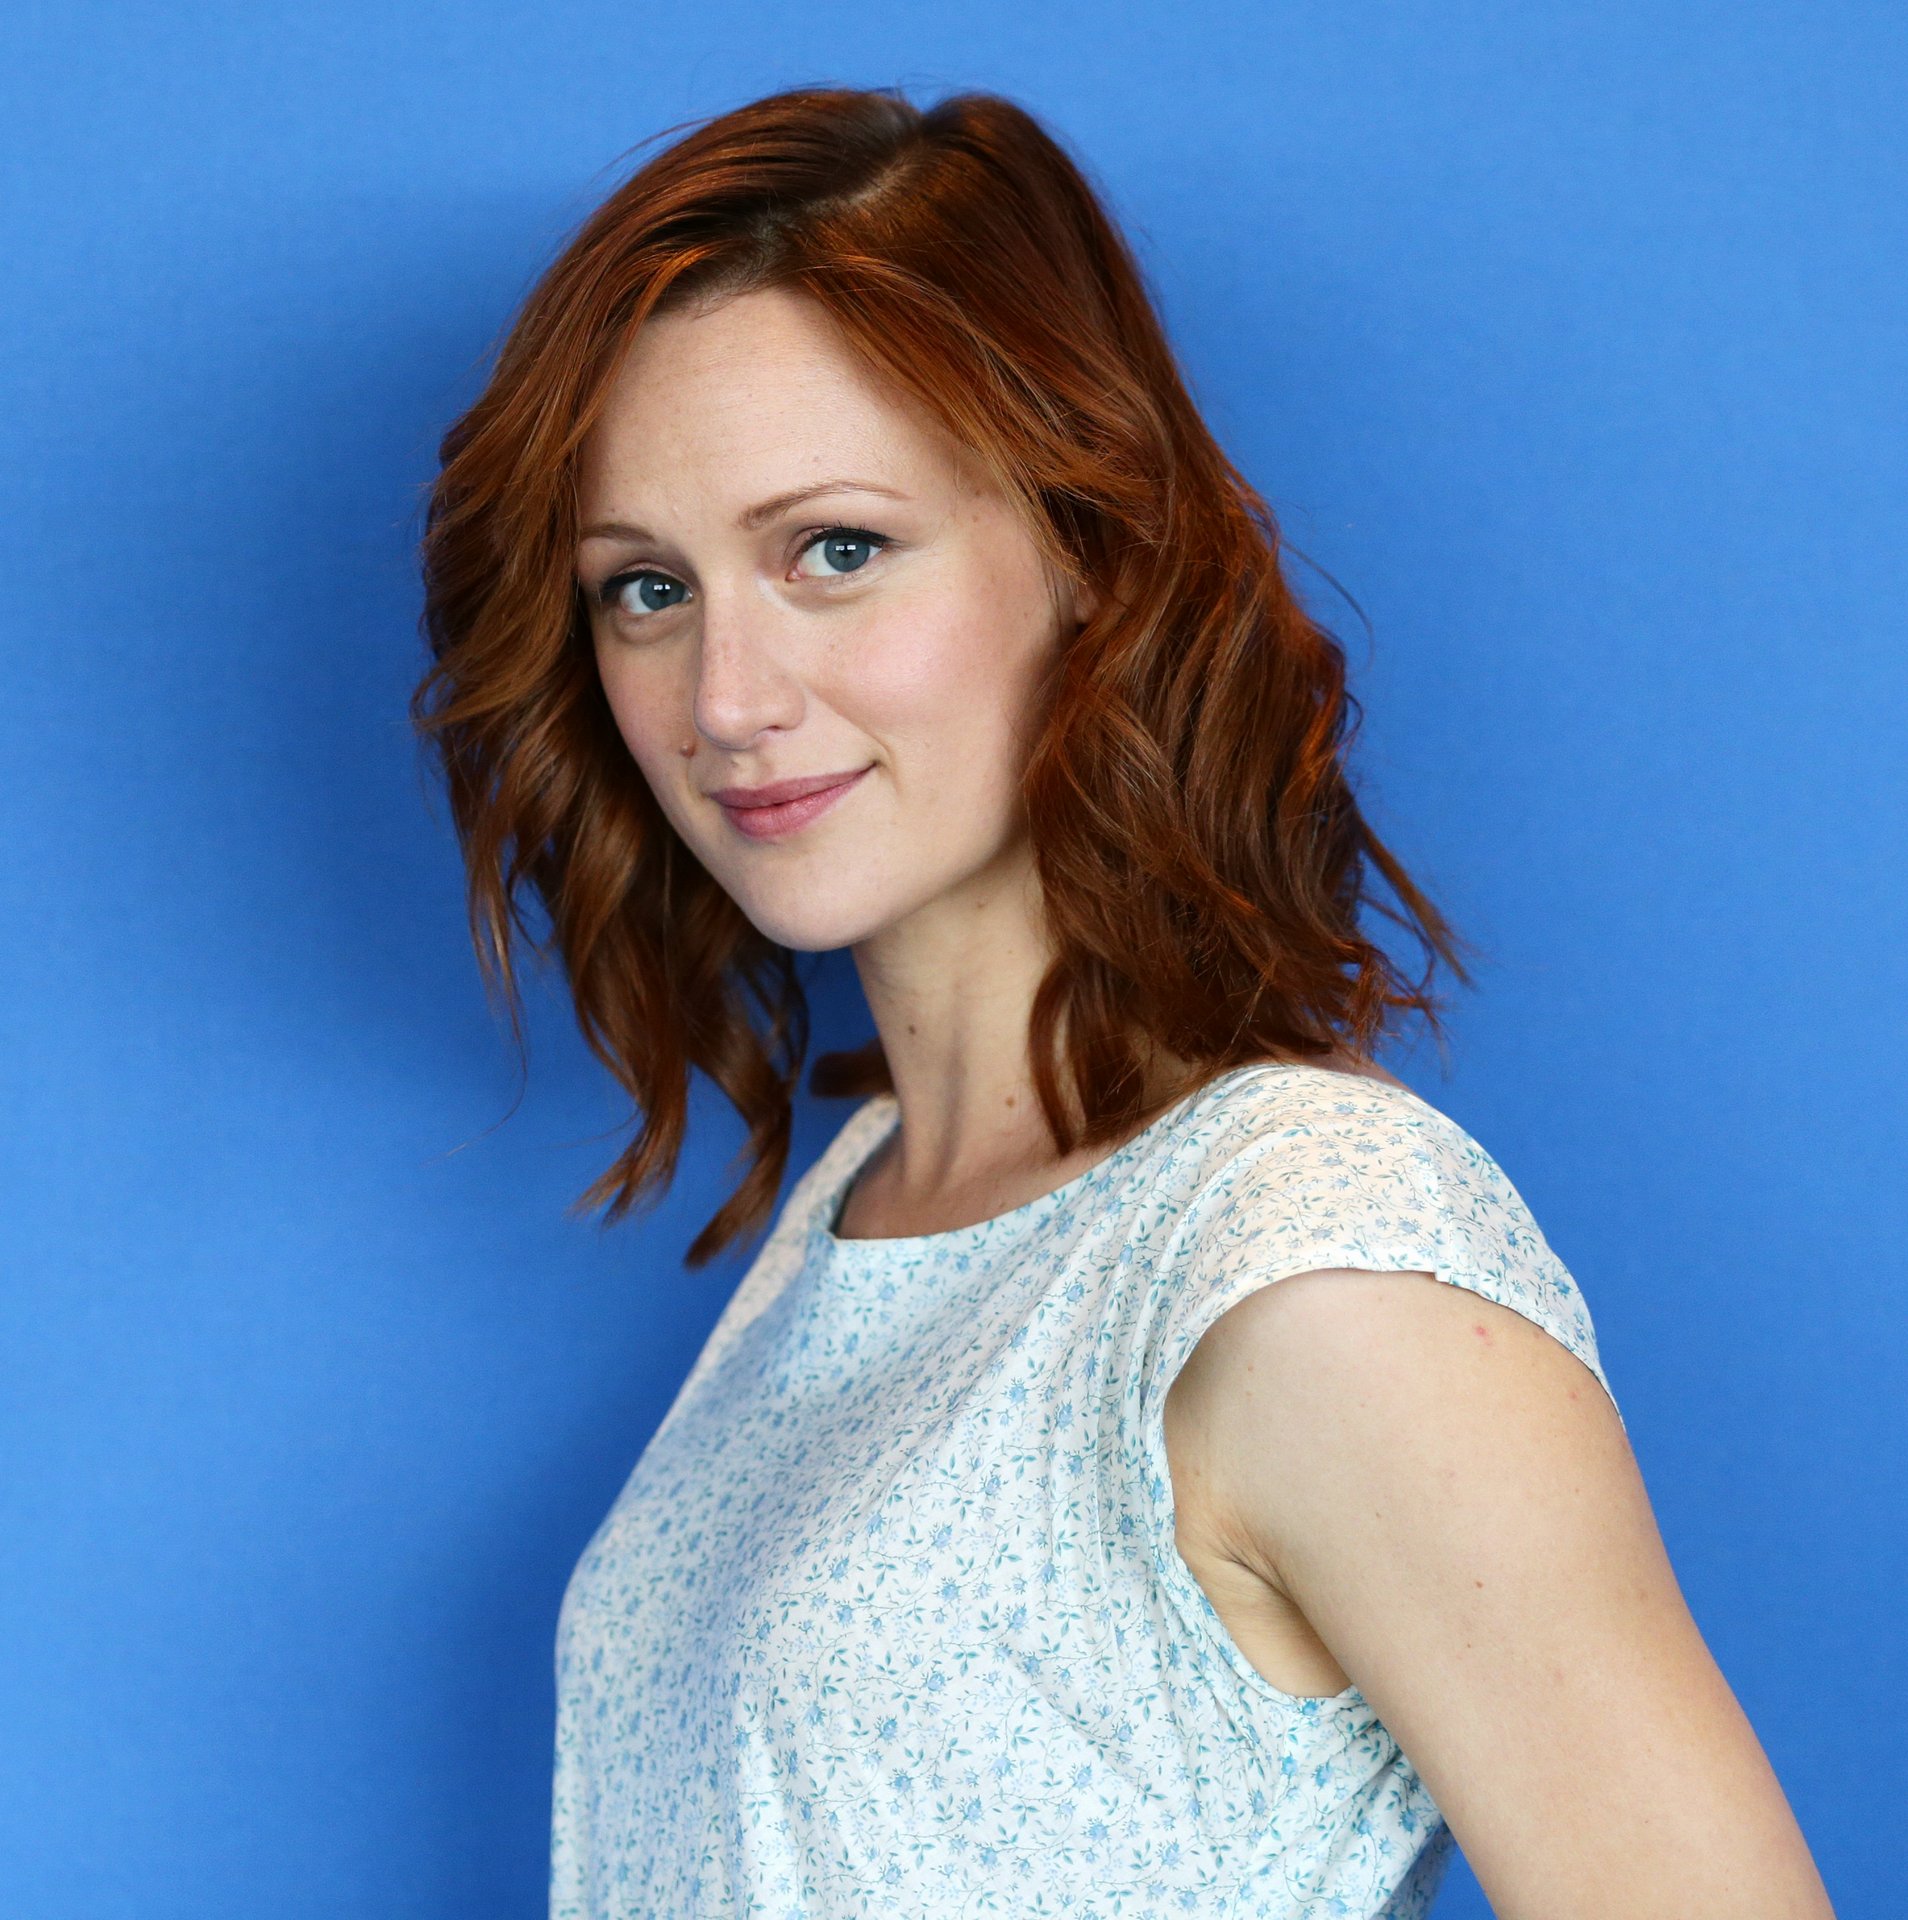 Hot TV Babe Of The Week.Kerry Bishé.